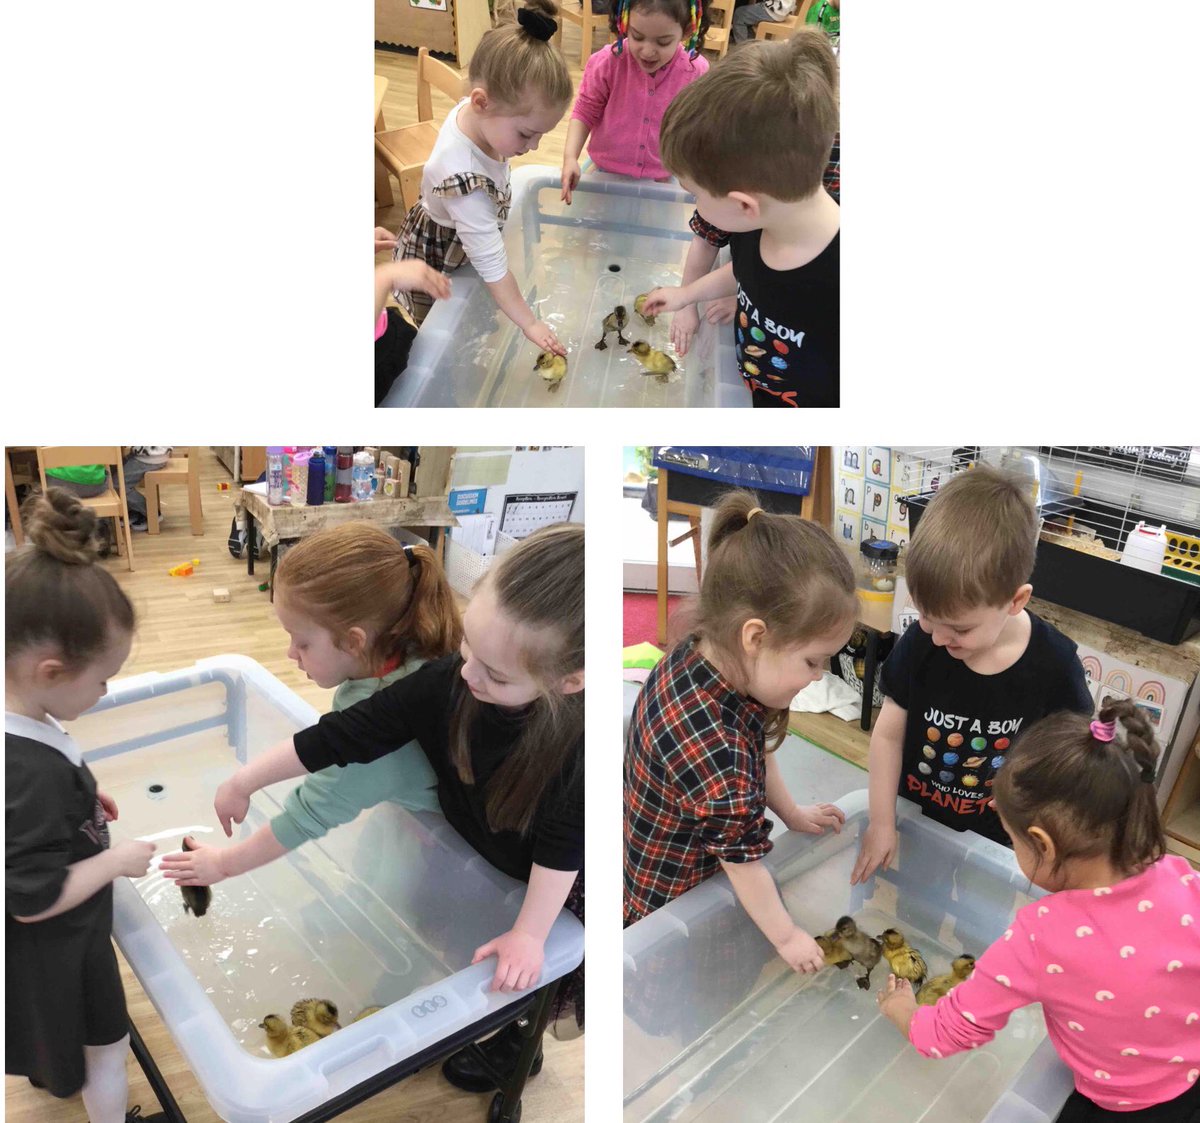 This morning we had an exciting addition to our water tray 🦆 Reception enjoyed watching our ducklings splash in the water 🌈 @parishschool1 #Parishearlyyears